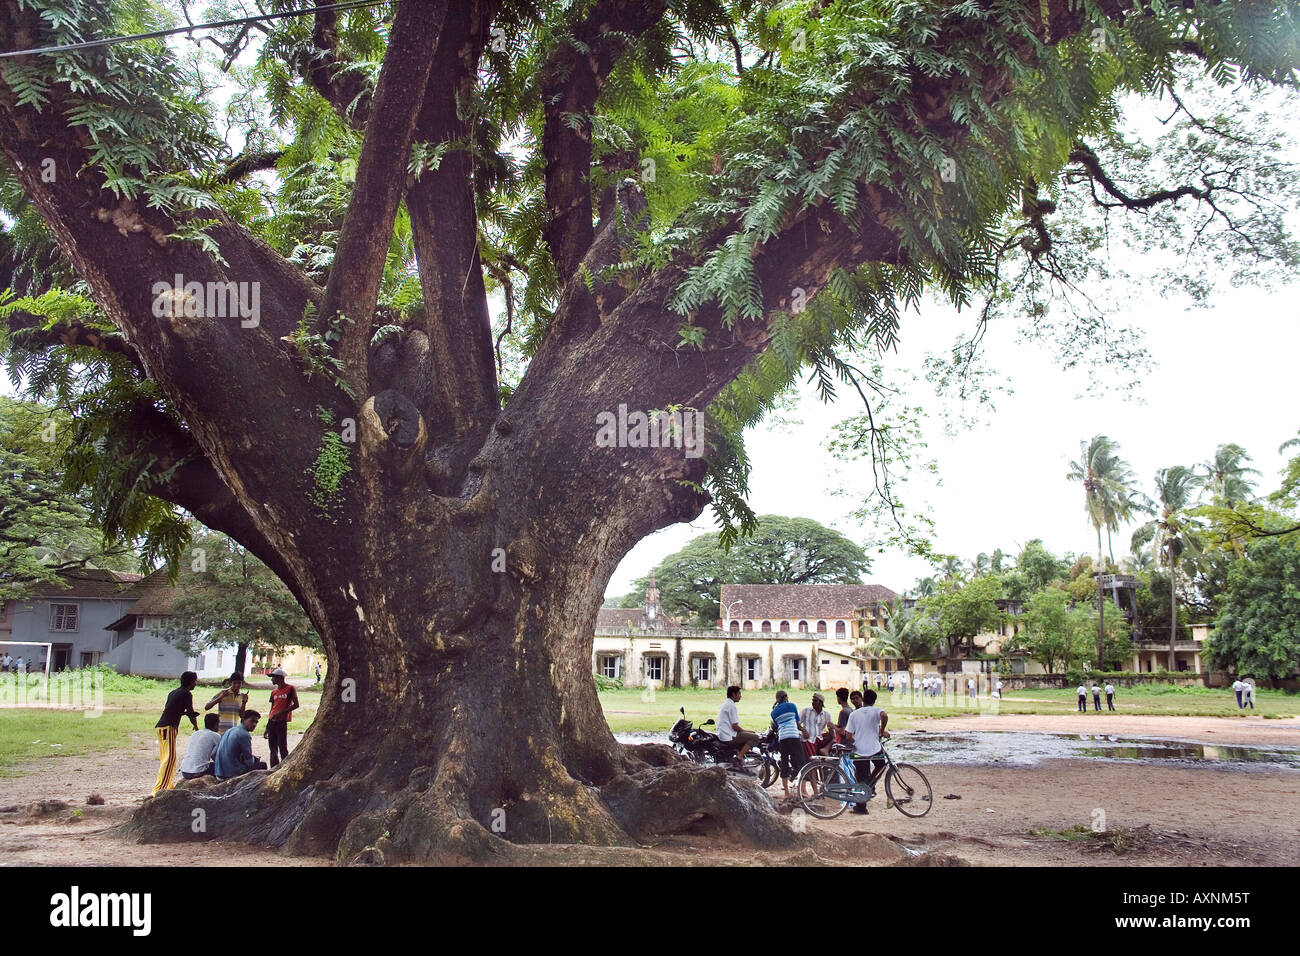 Local lads casually meeting under widespread branches of a rain tree Parade grounds Fort Kochi Cochin Kerala South India Stock Photo